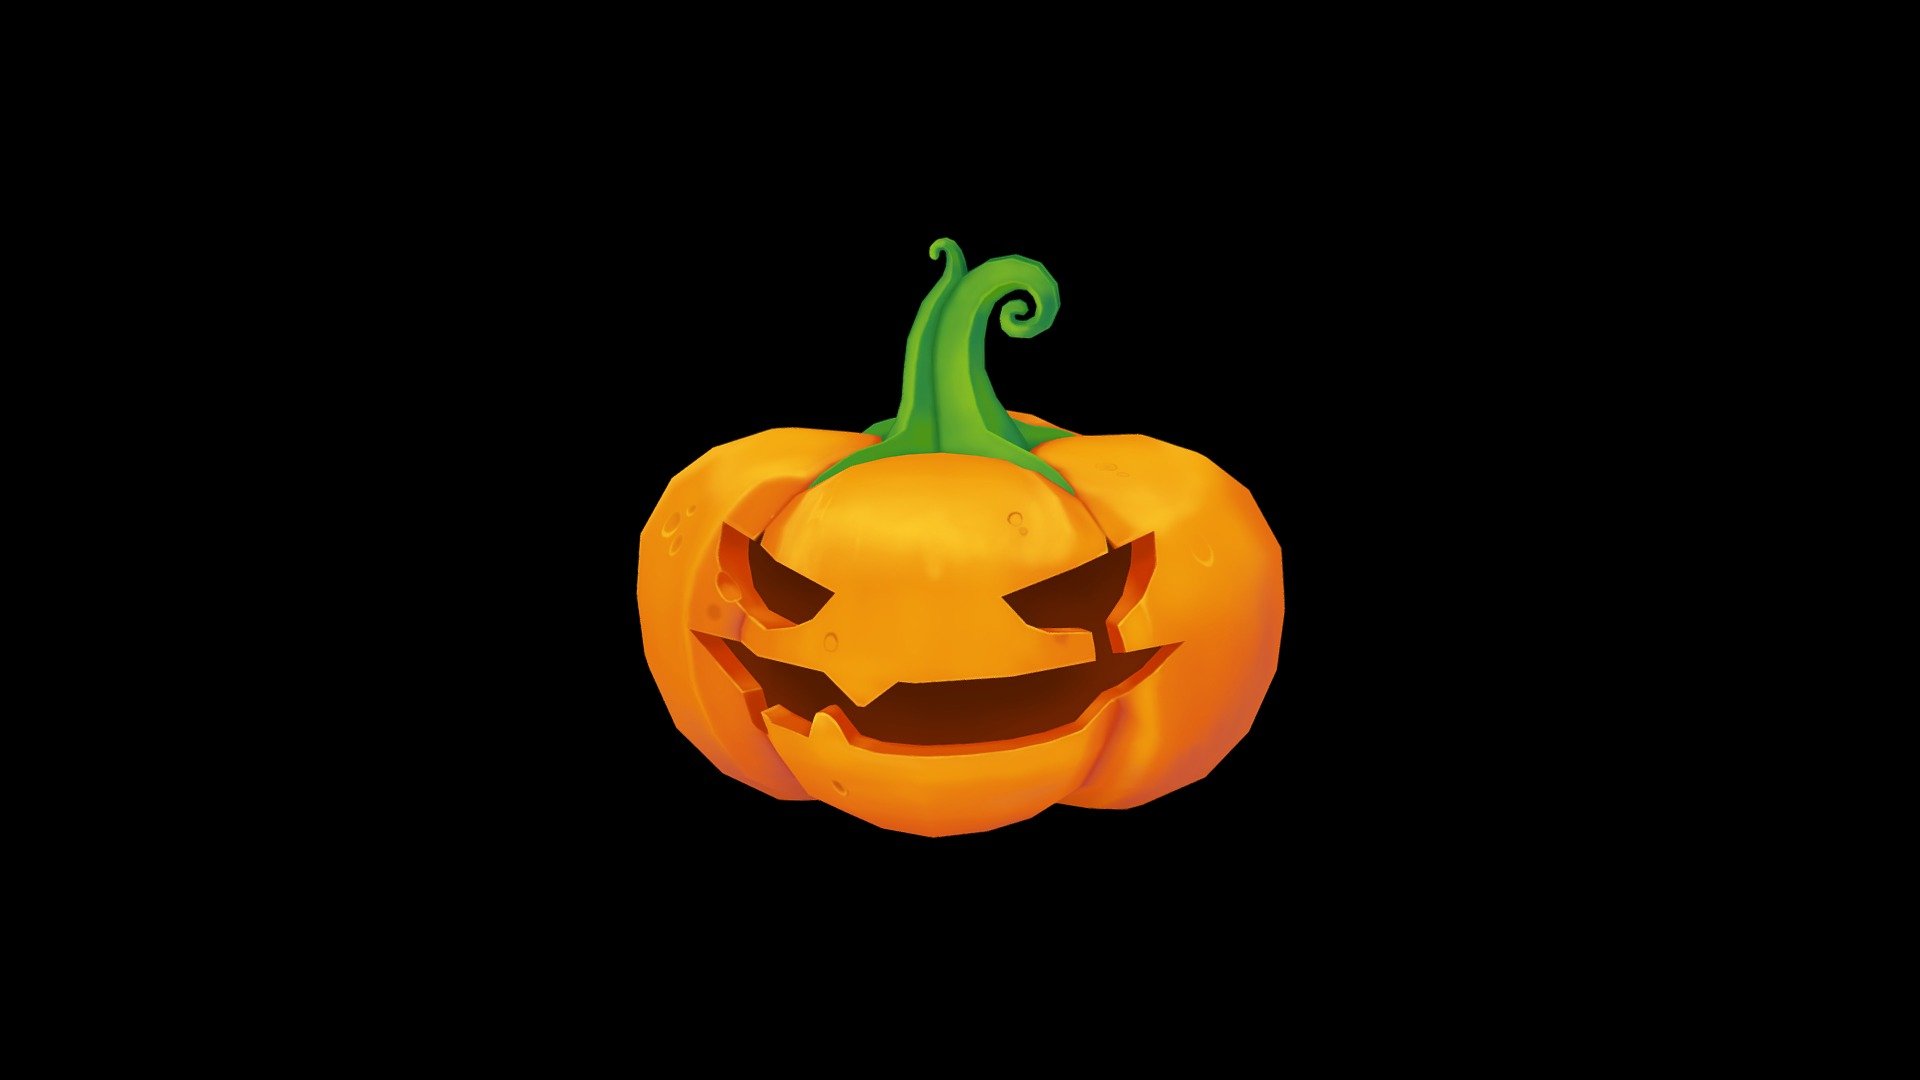 Finished this lil guy in honor of my favorite time of the year!! This was made as practice for a live demo I will be giving current students at the college I graduated from. How exciting and flattering it was to be asked to give a demo!! :')

I modeled and UVed this guy in Maya, textured in Substance Painter.

This lil jack-o-lantern is based off a concept made by Umitay Ali on Artstation: https://www.artstation.com/artwork/dOWN6A. Go give them a follow!! - Jack-o-lantern! - 3D model by Shelby Merrill (@polygoth) 3d model